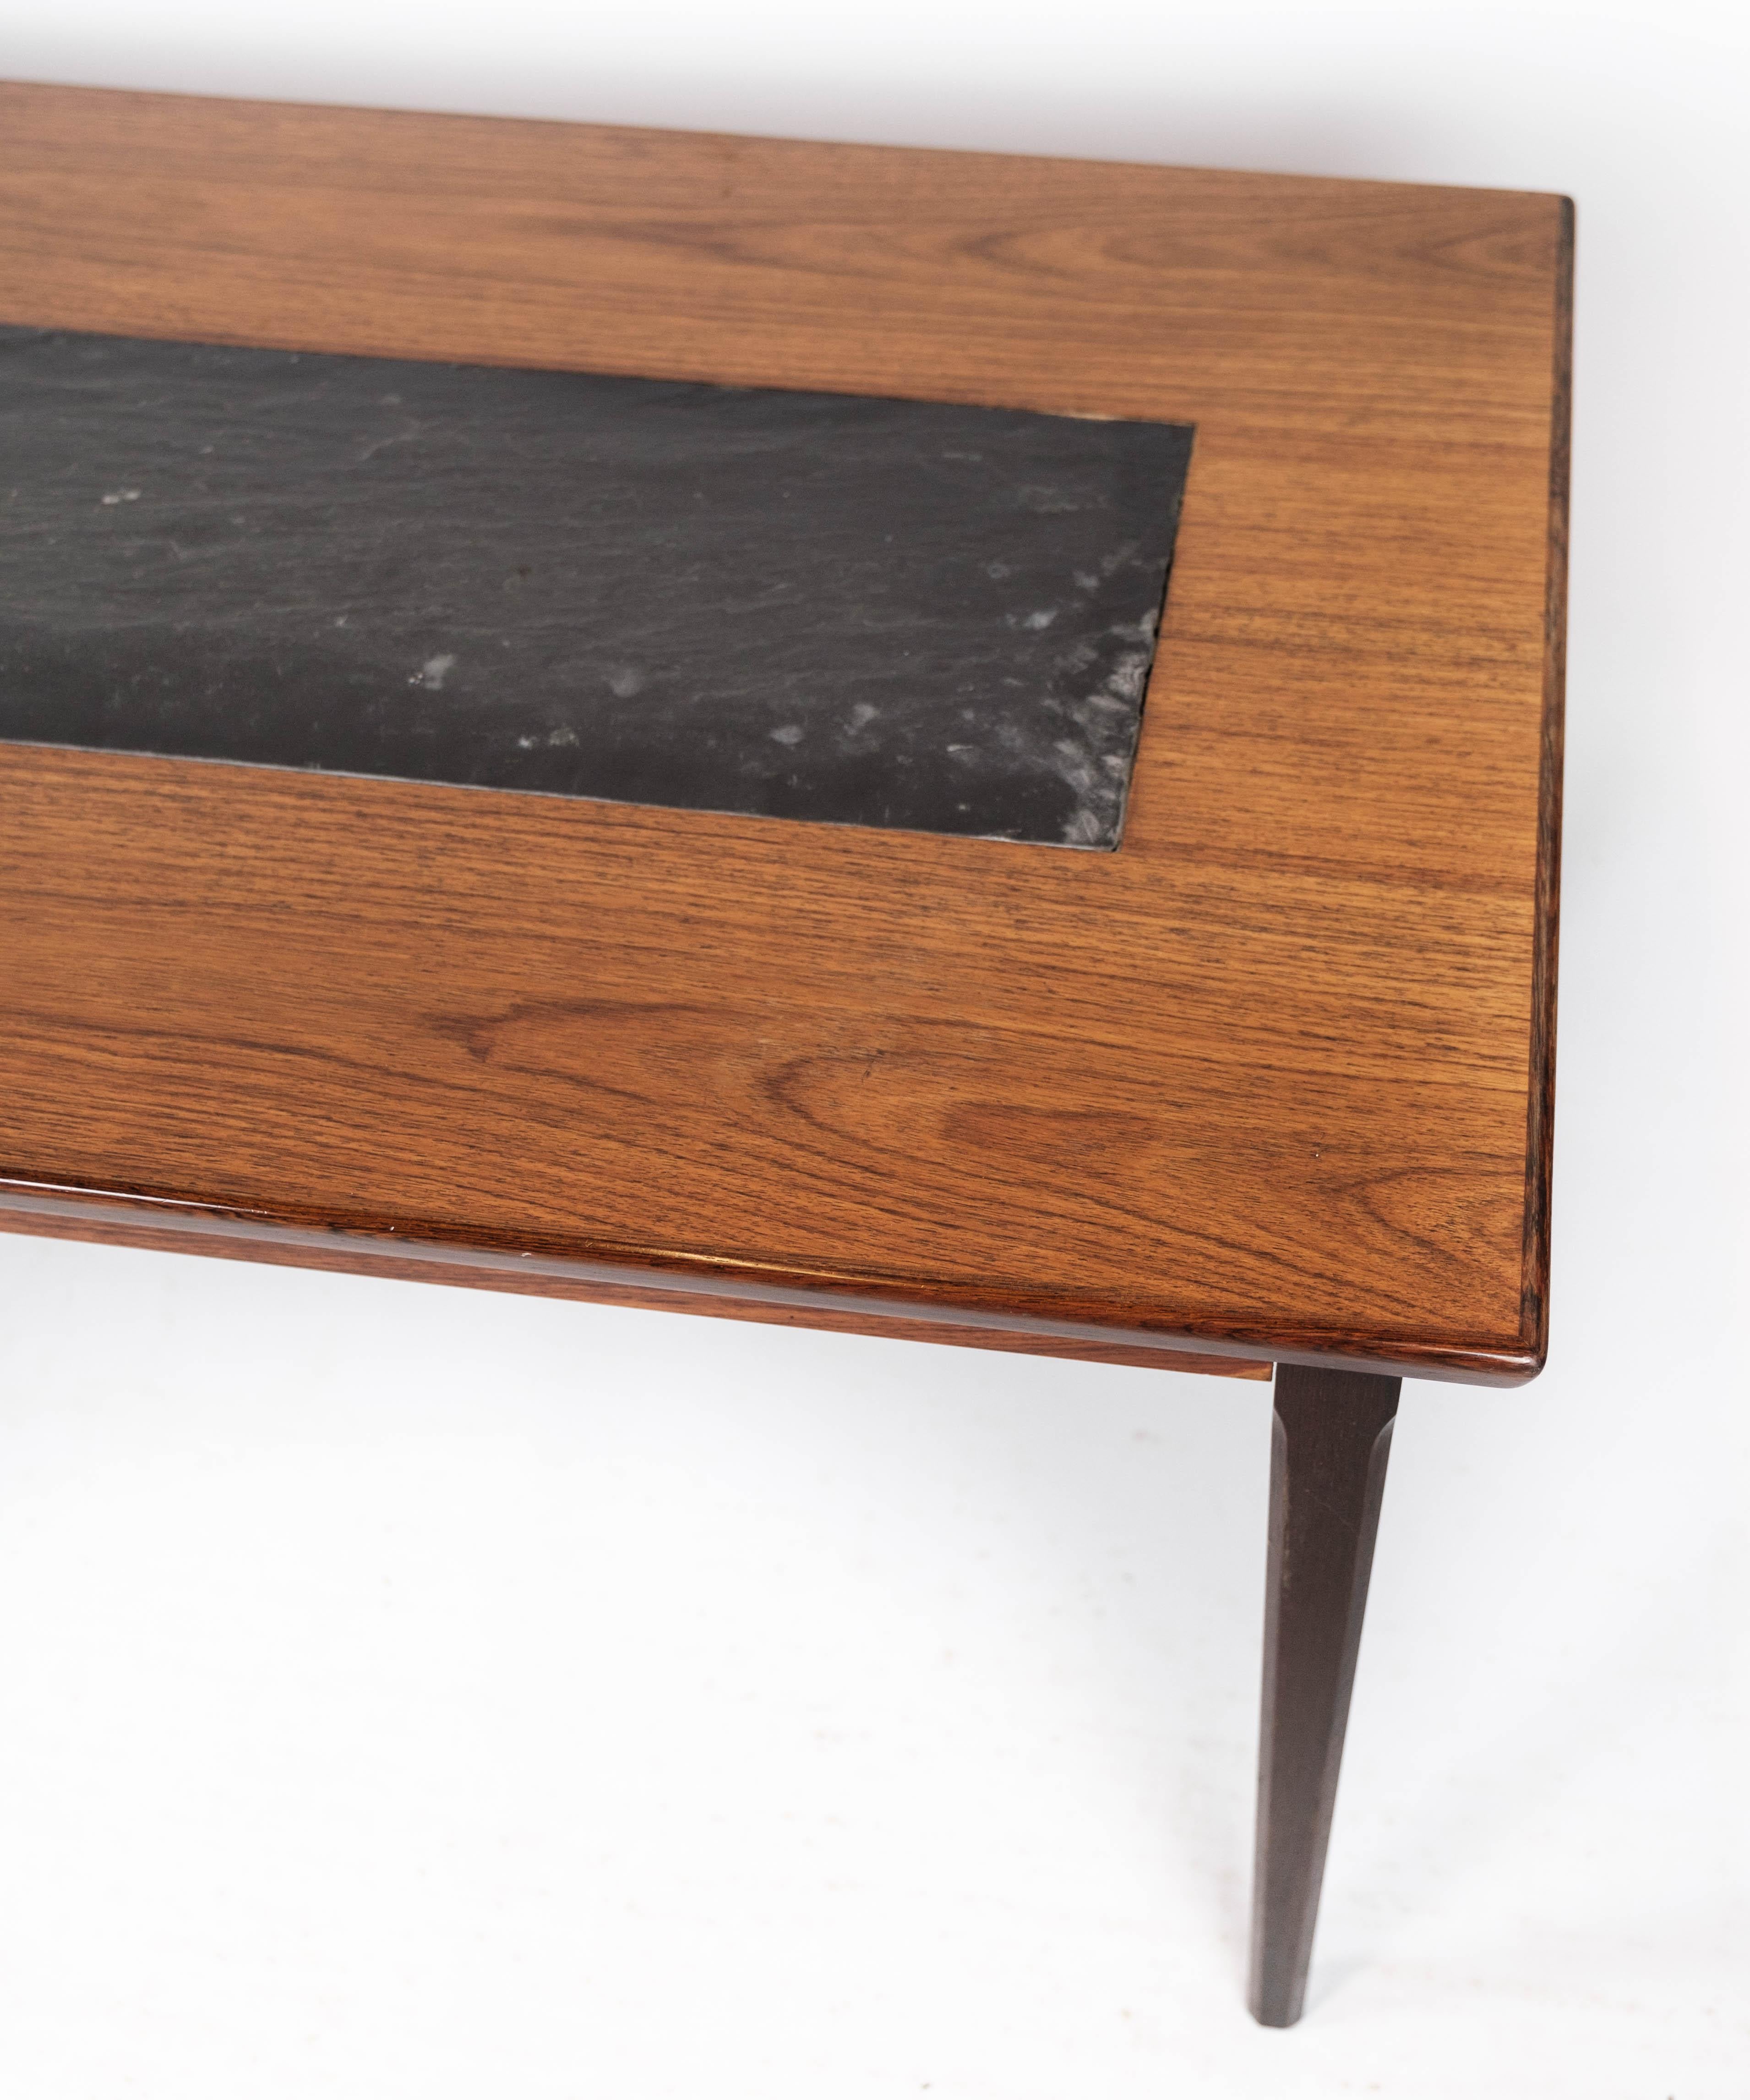 The coffee table, crafted from rosewood and black slate and of Danish design from the 1960s, is a striking example of mid-century modern craftsmanship.

Combining the rich tones of rosewood with the sleek sophistication of black slate, this table